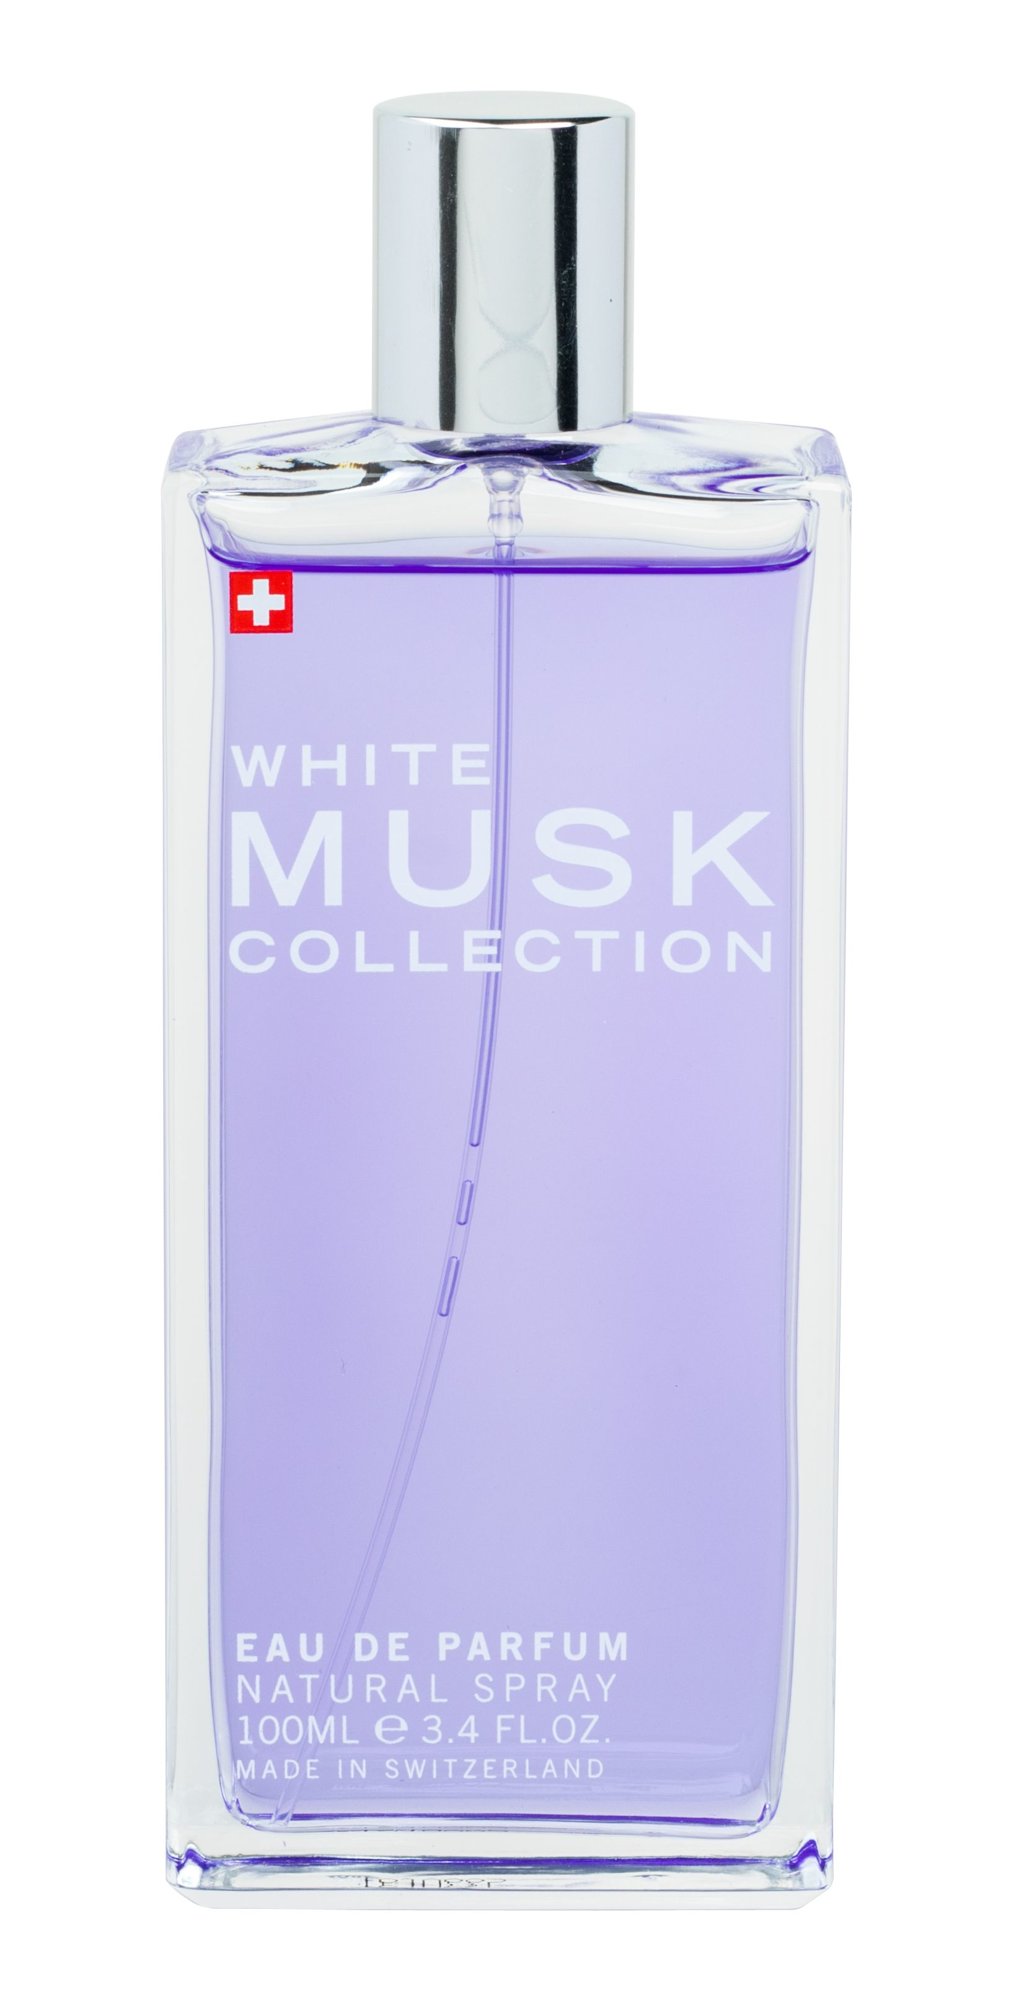 MUSK White Collection